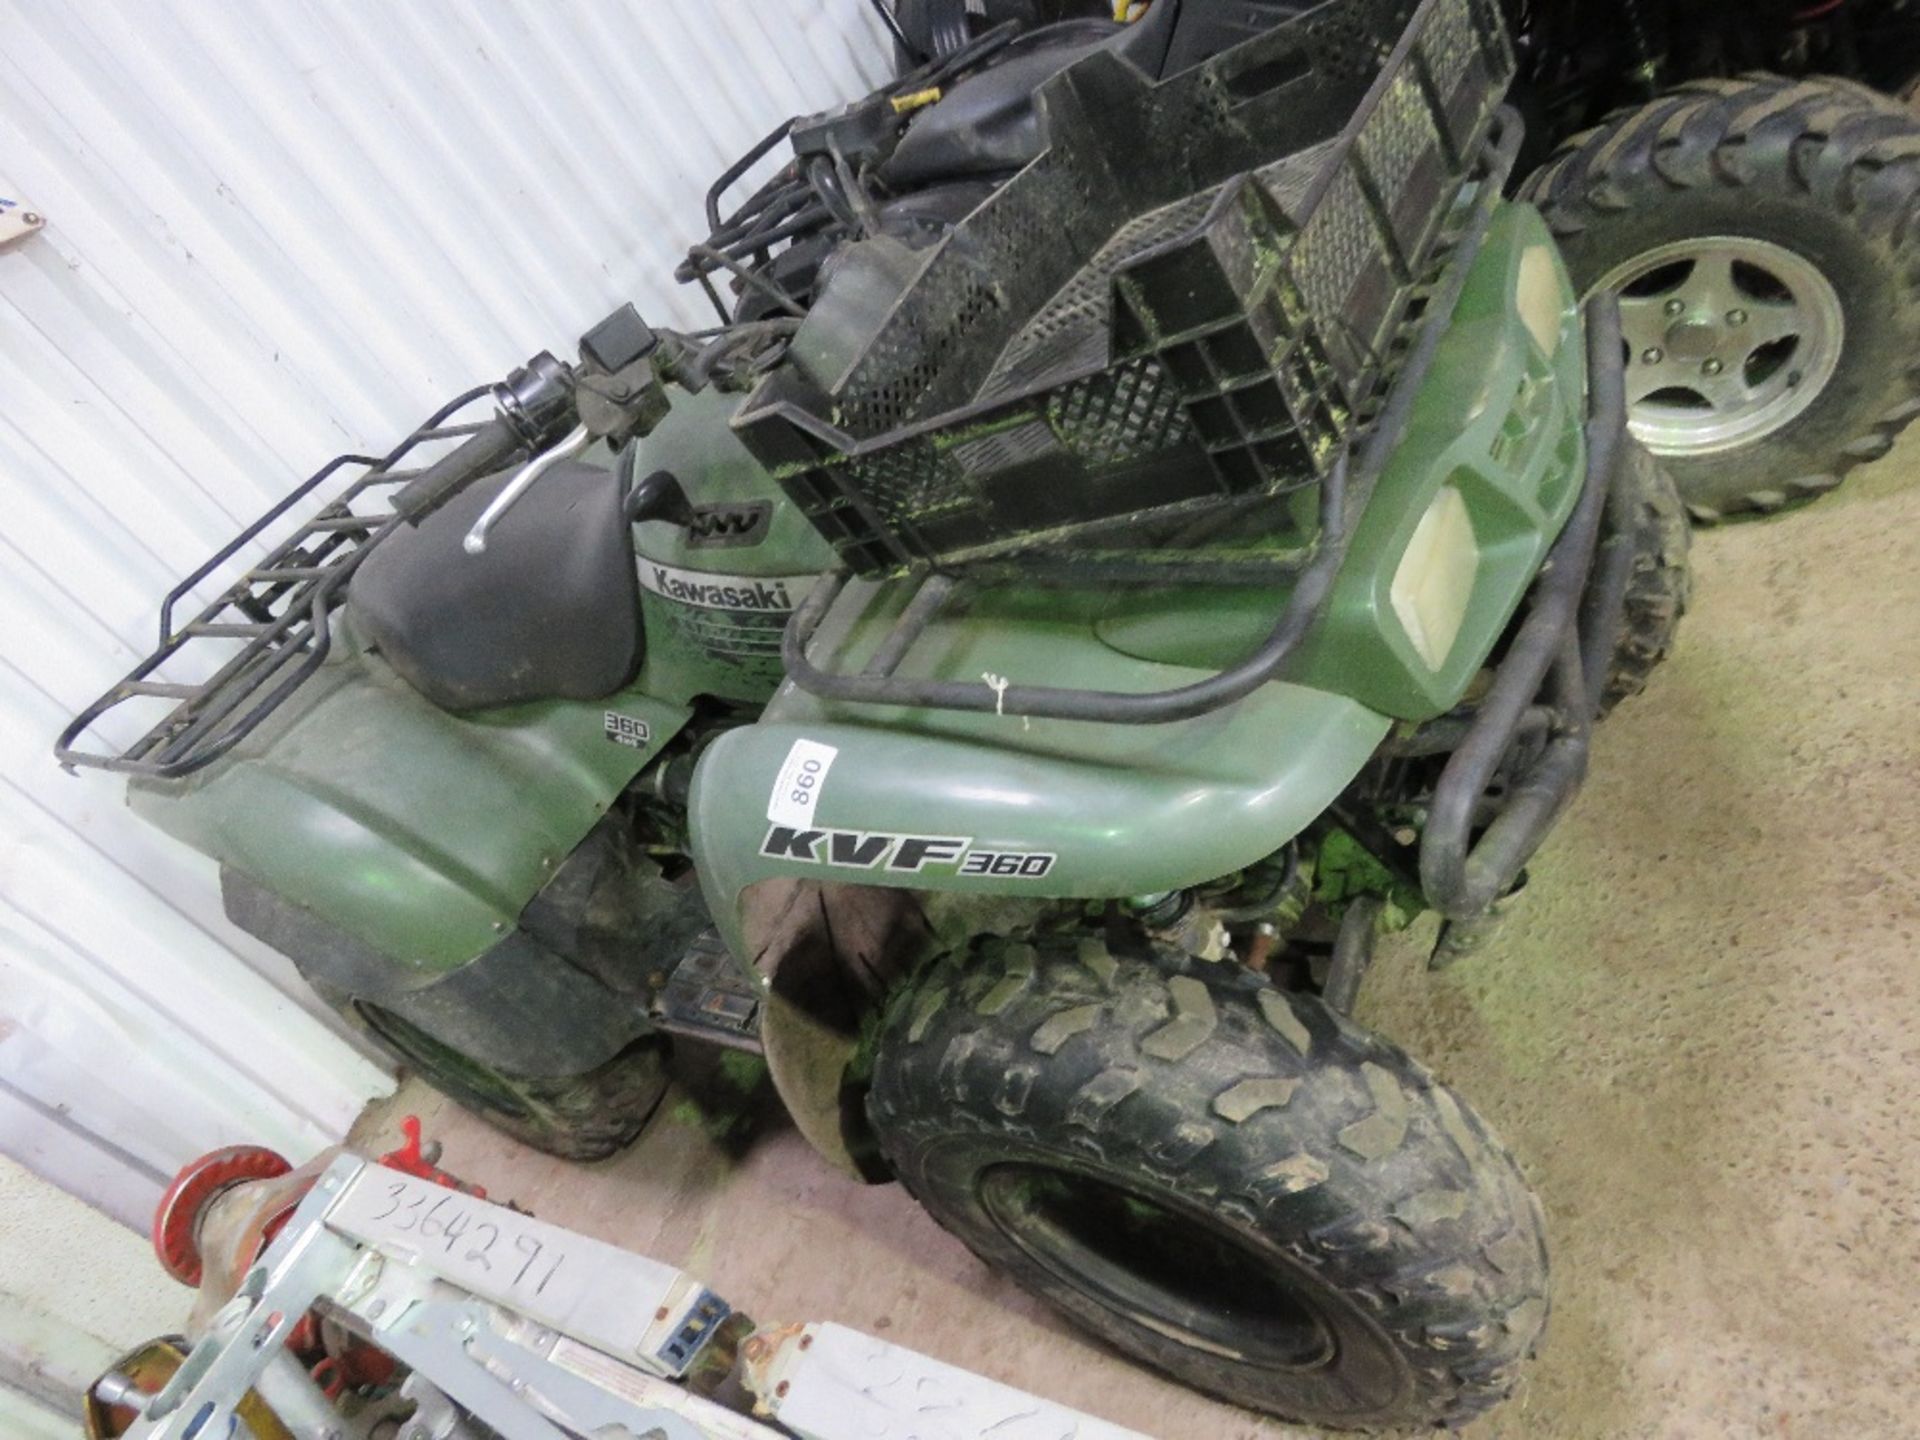 KAWASAKI KVF360 4WD QUAD BIKE, 2939 REC HRS. WHEN TESTED WAS SEEN TO DRIVE...SEE VIDEO. - Image 2 of 7